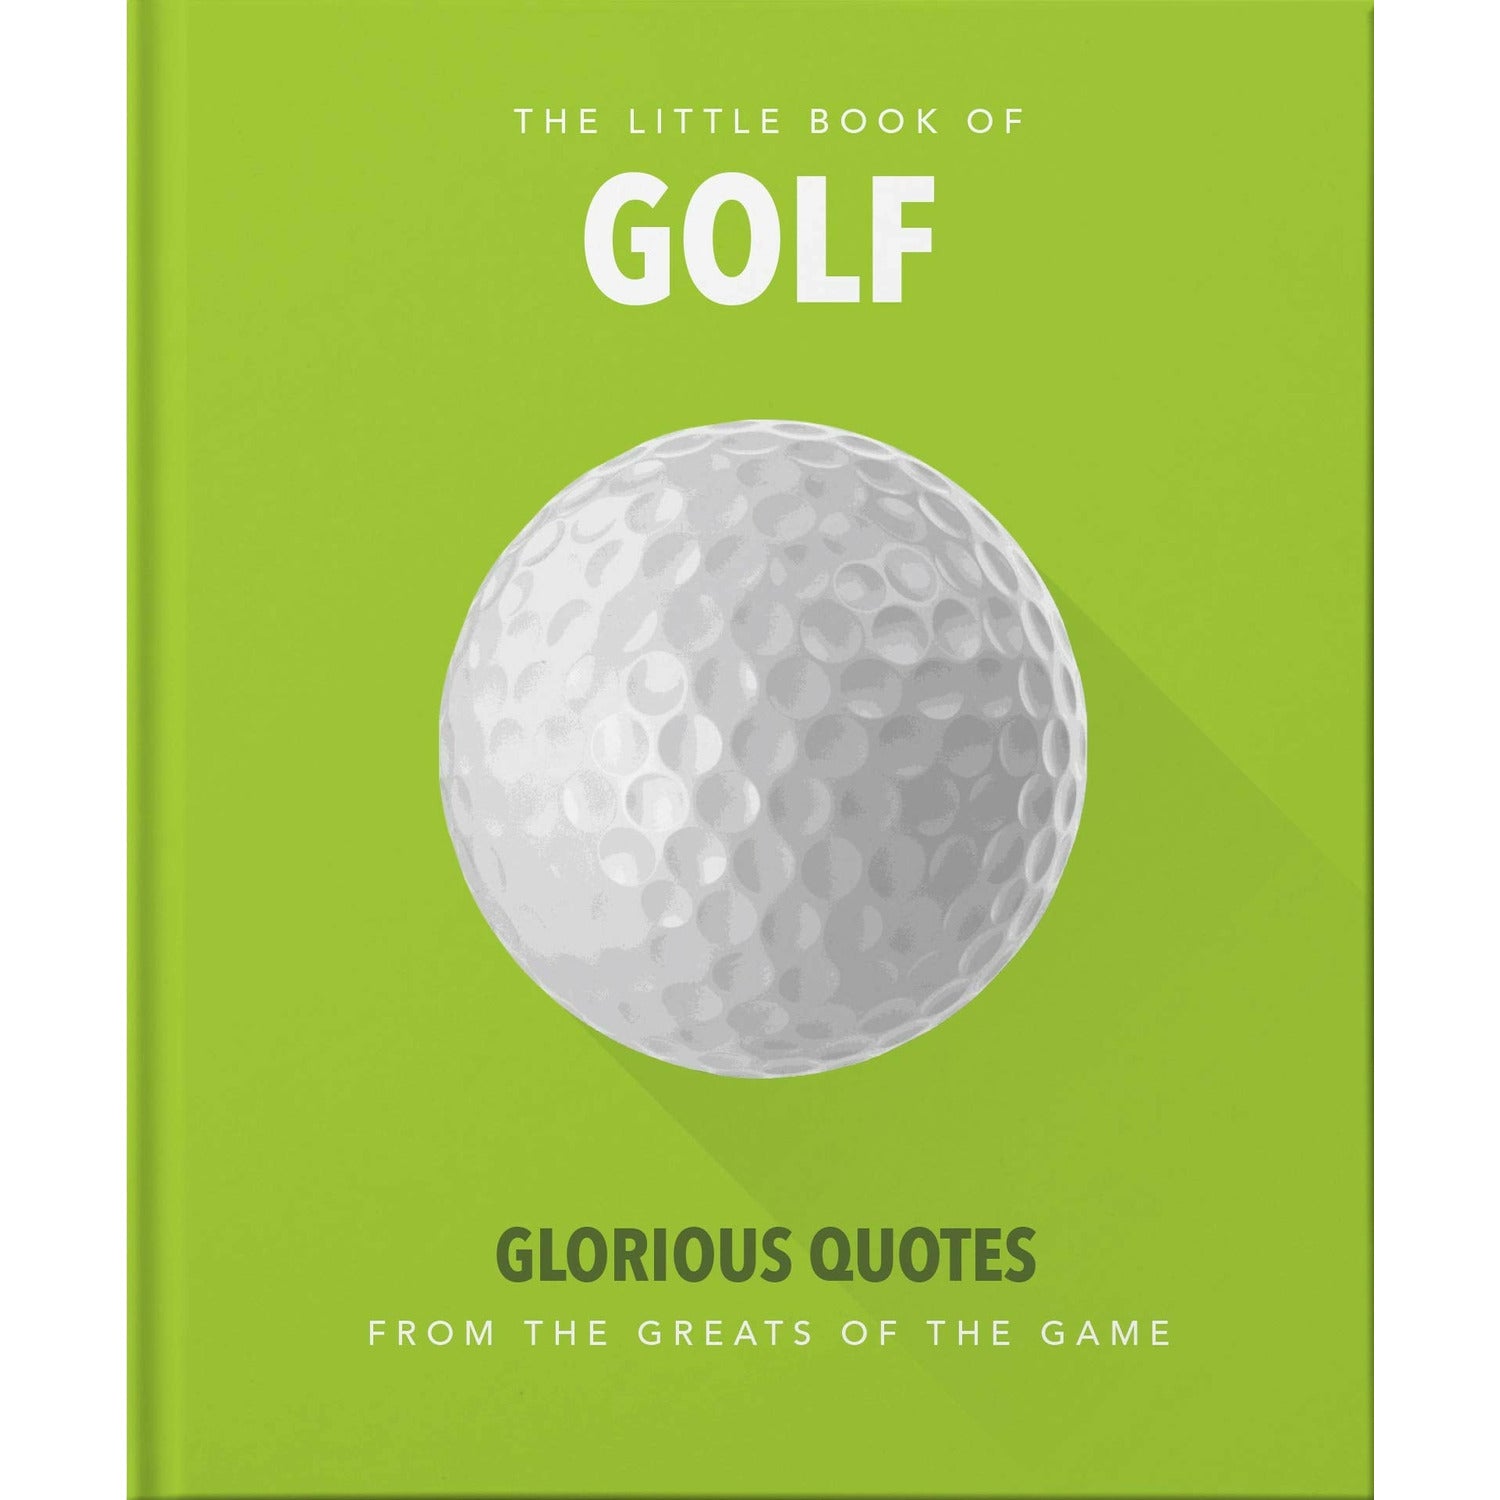 THE LITTLE BOOK OF GOLF